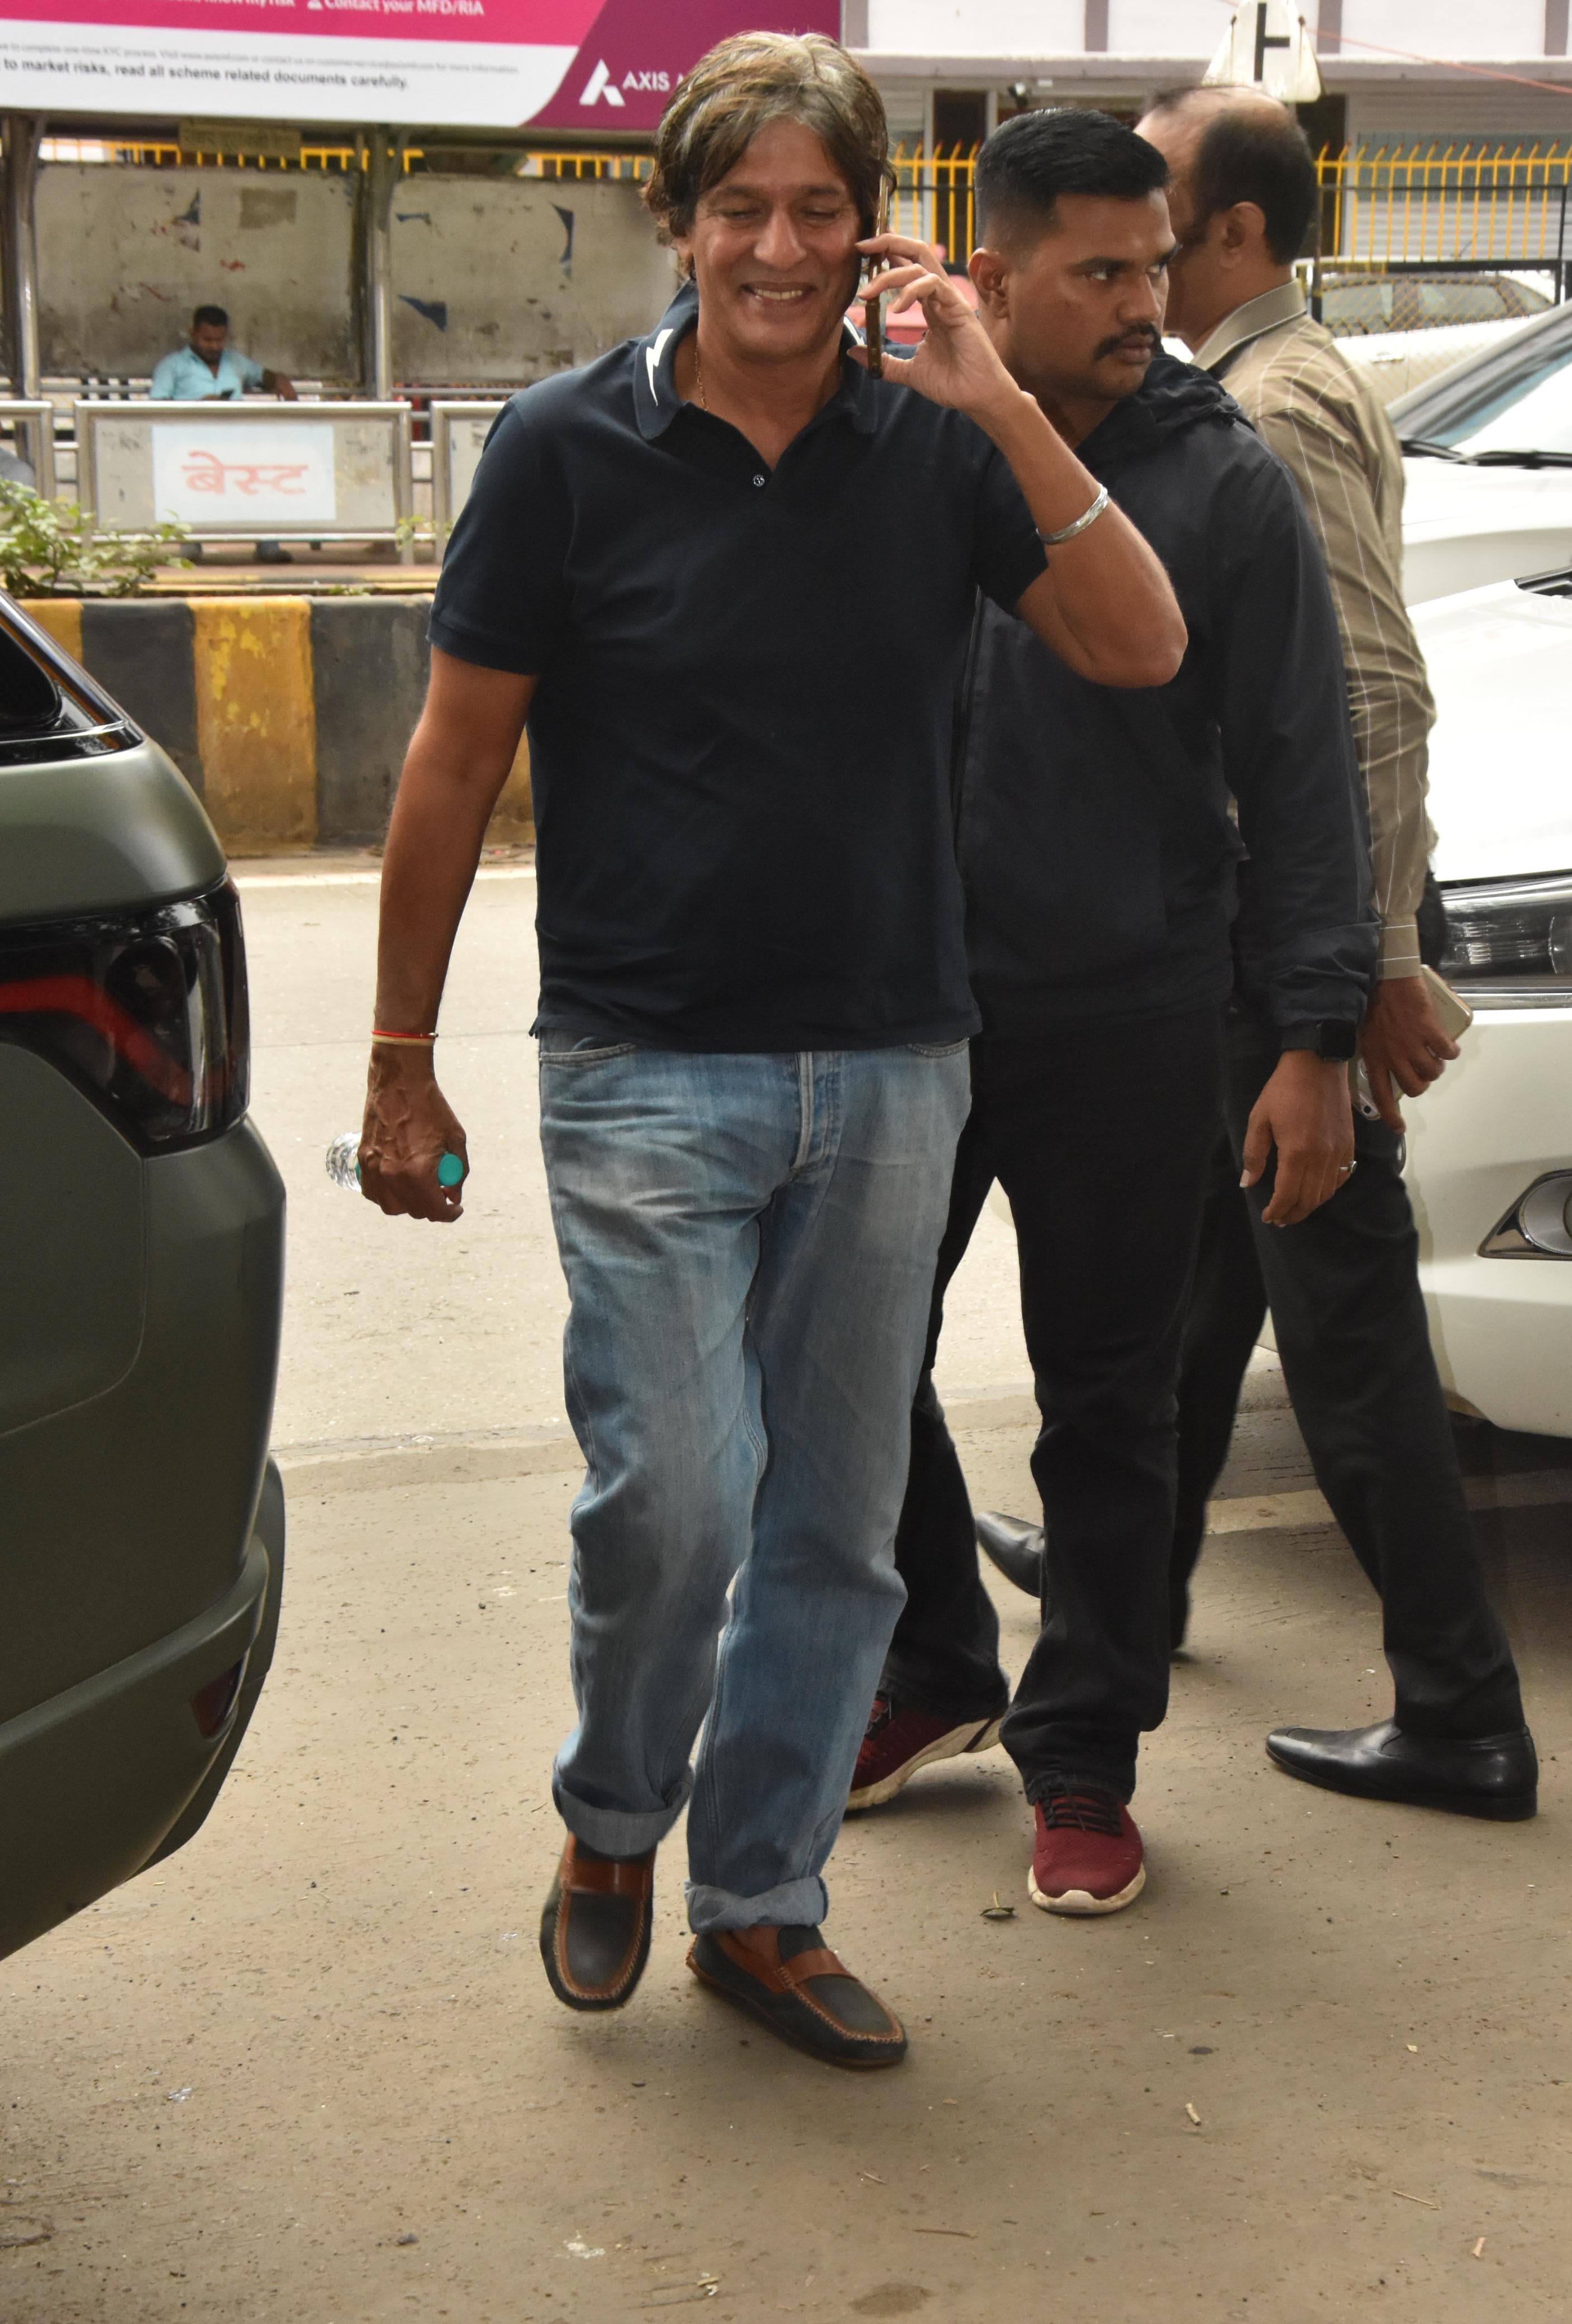 Chunky Pandey was snapped in the city as he went out and about